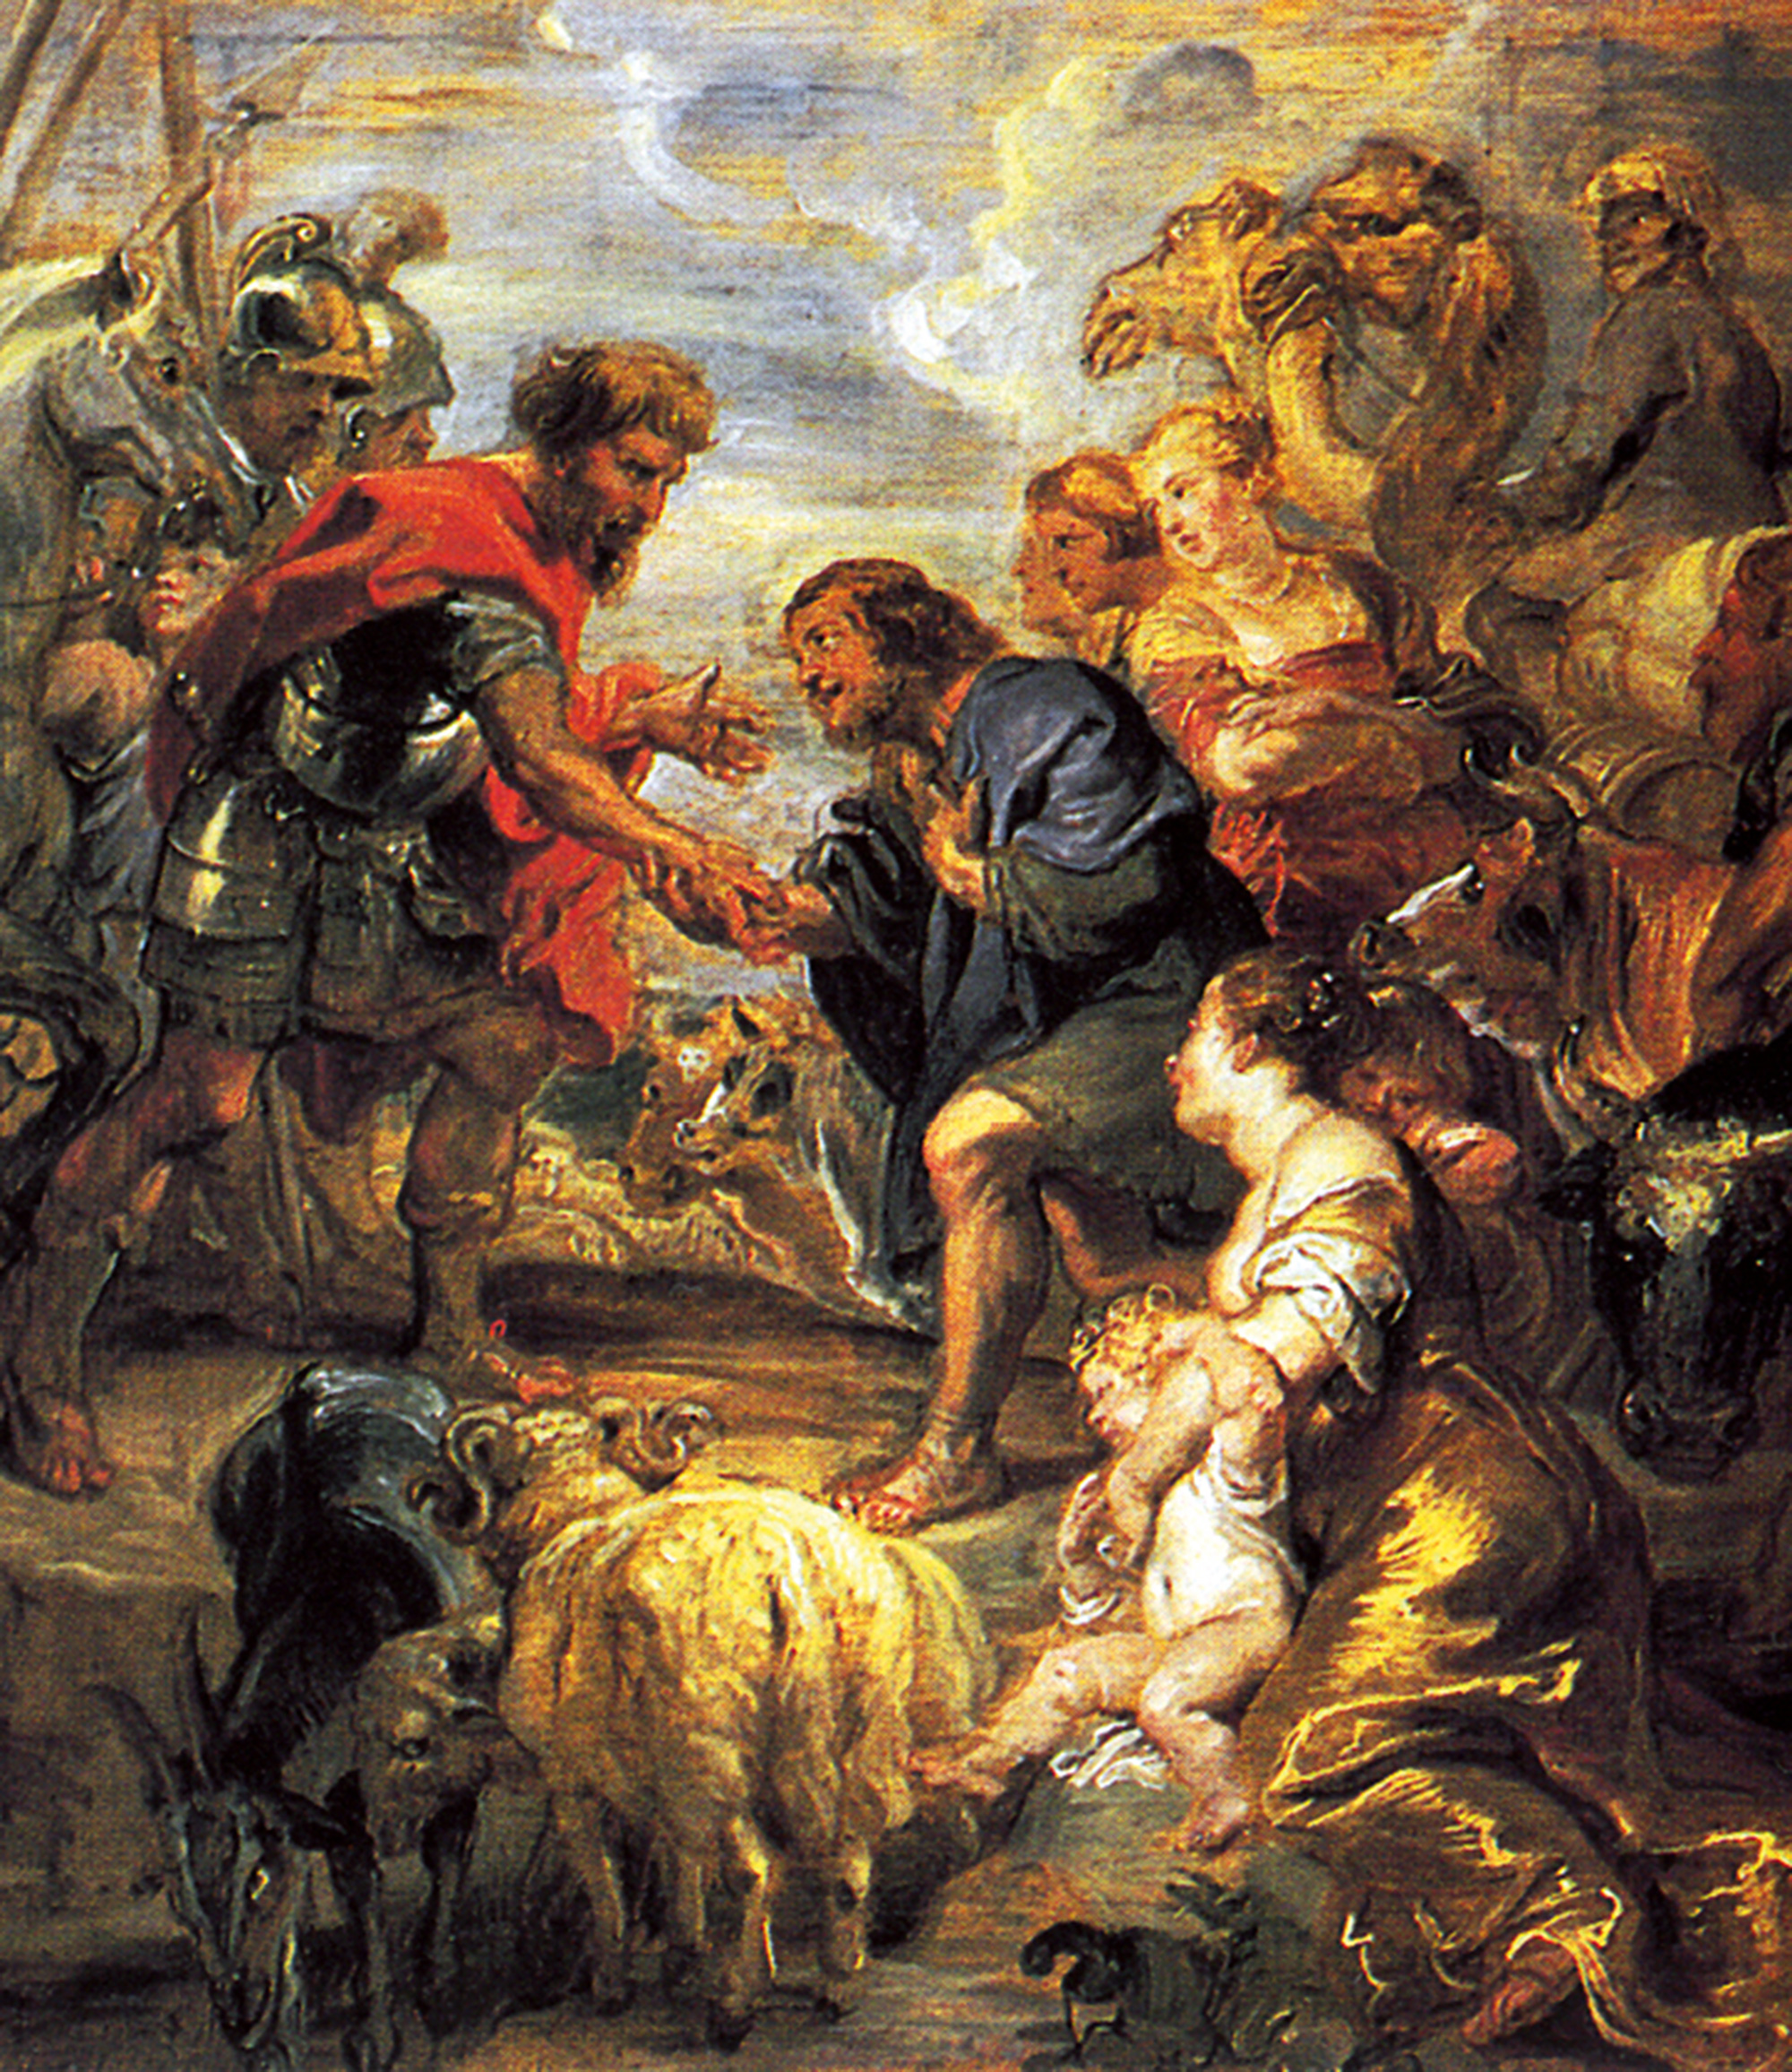 Peter Paul Rubens’s circa sixteen twenty-four painting titled “The Reconciliation of Jacob and Esau.”